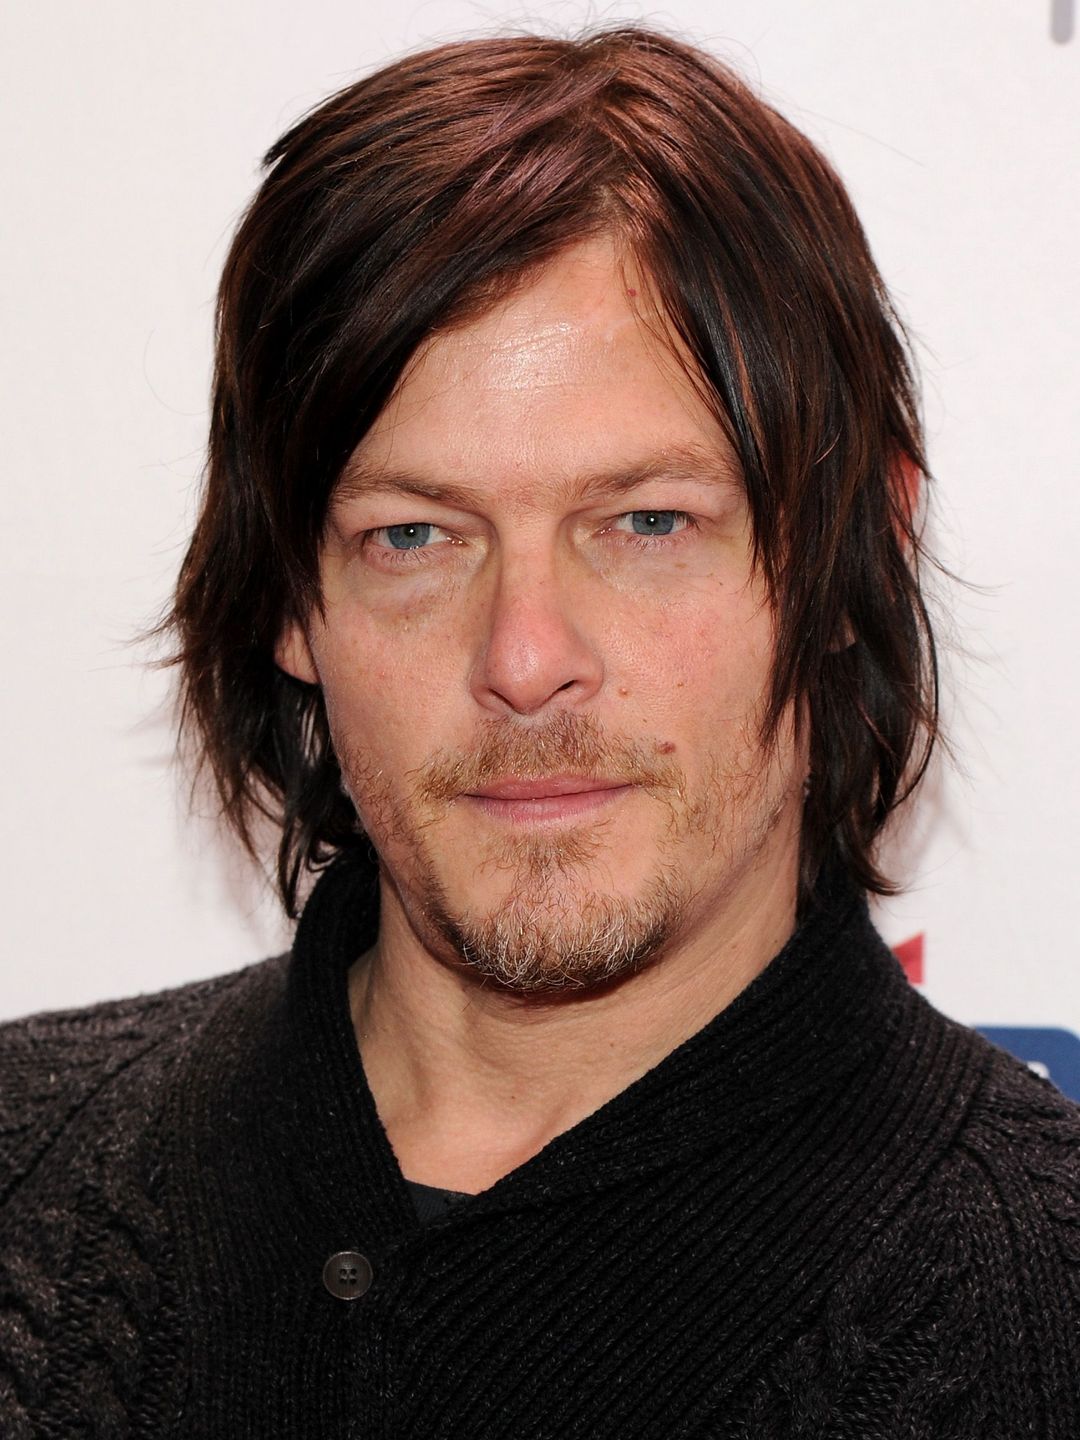 Norman Reedus appearance